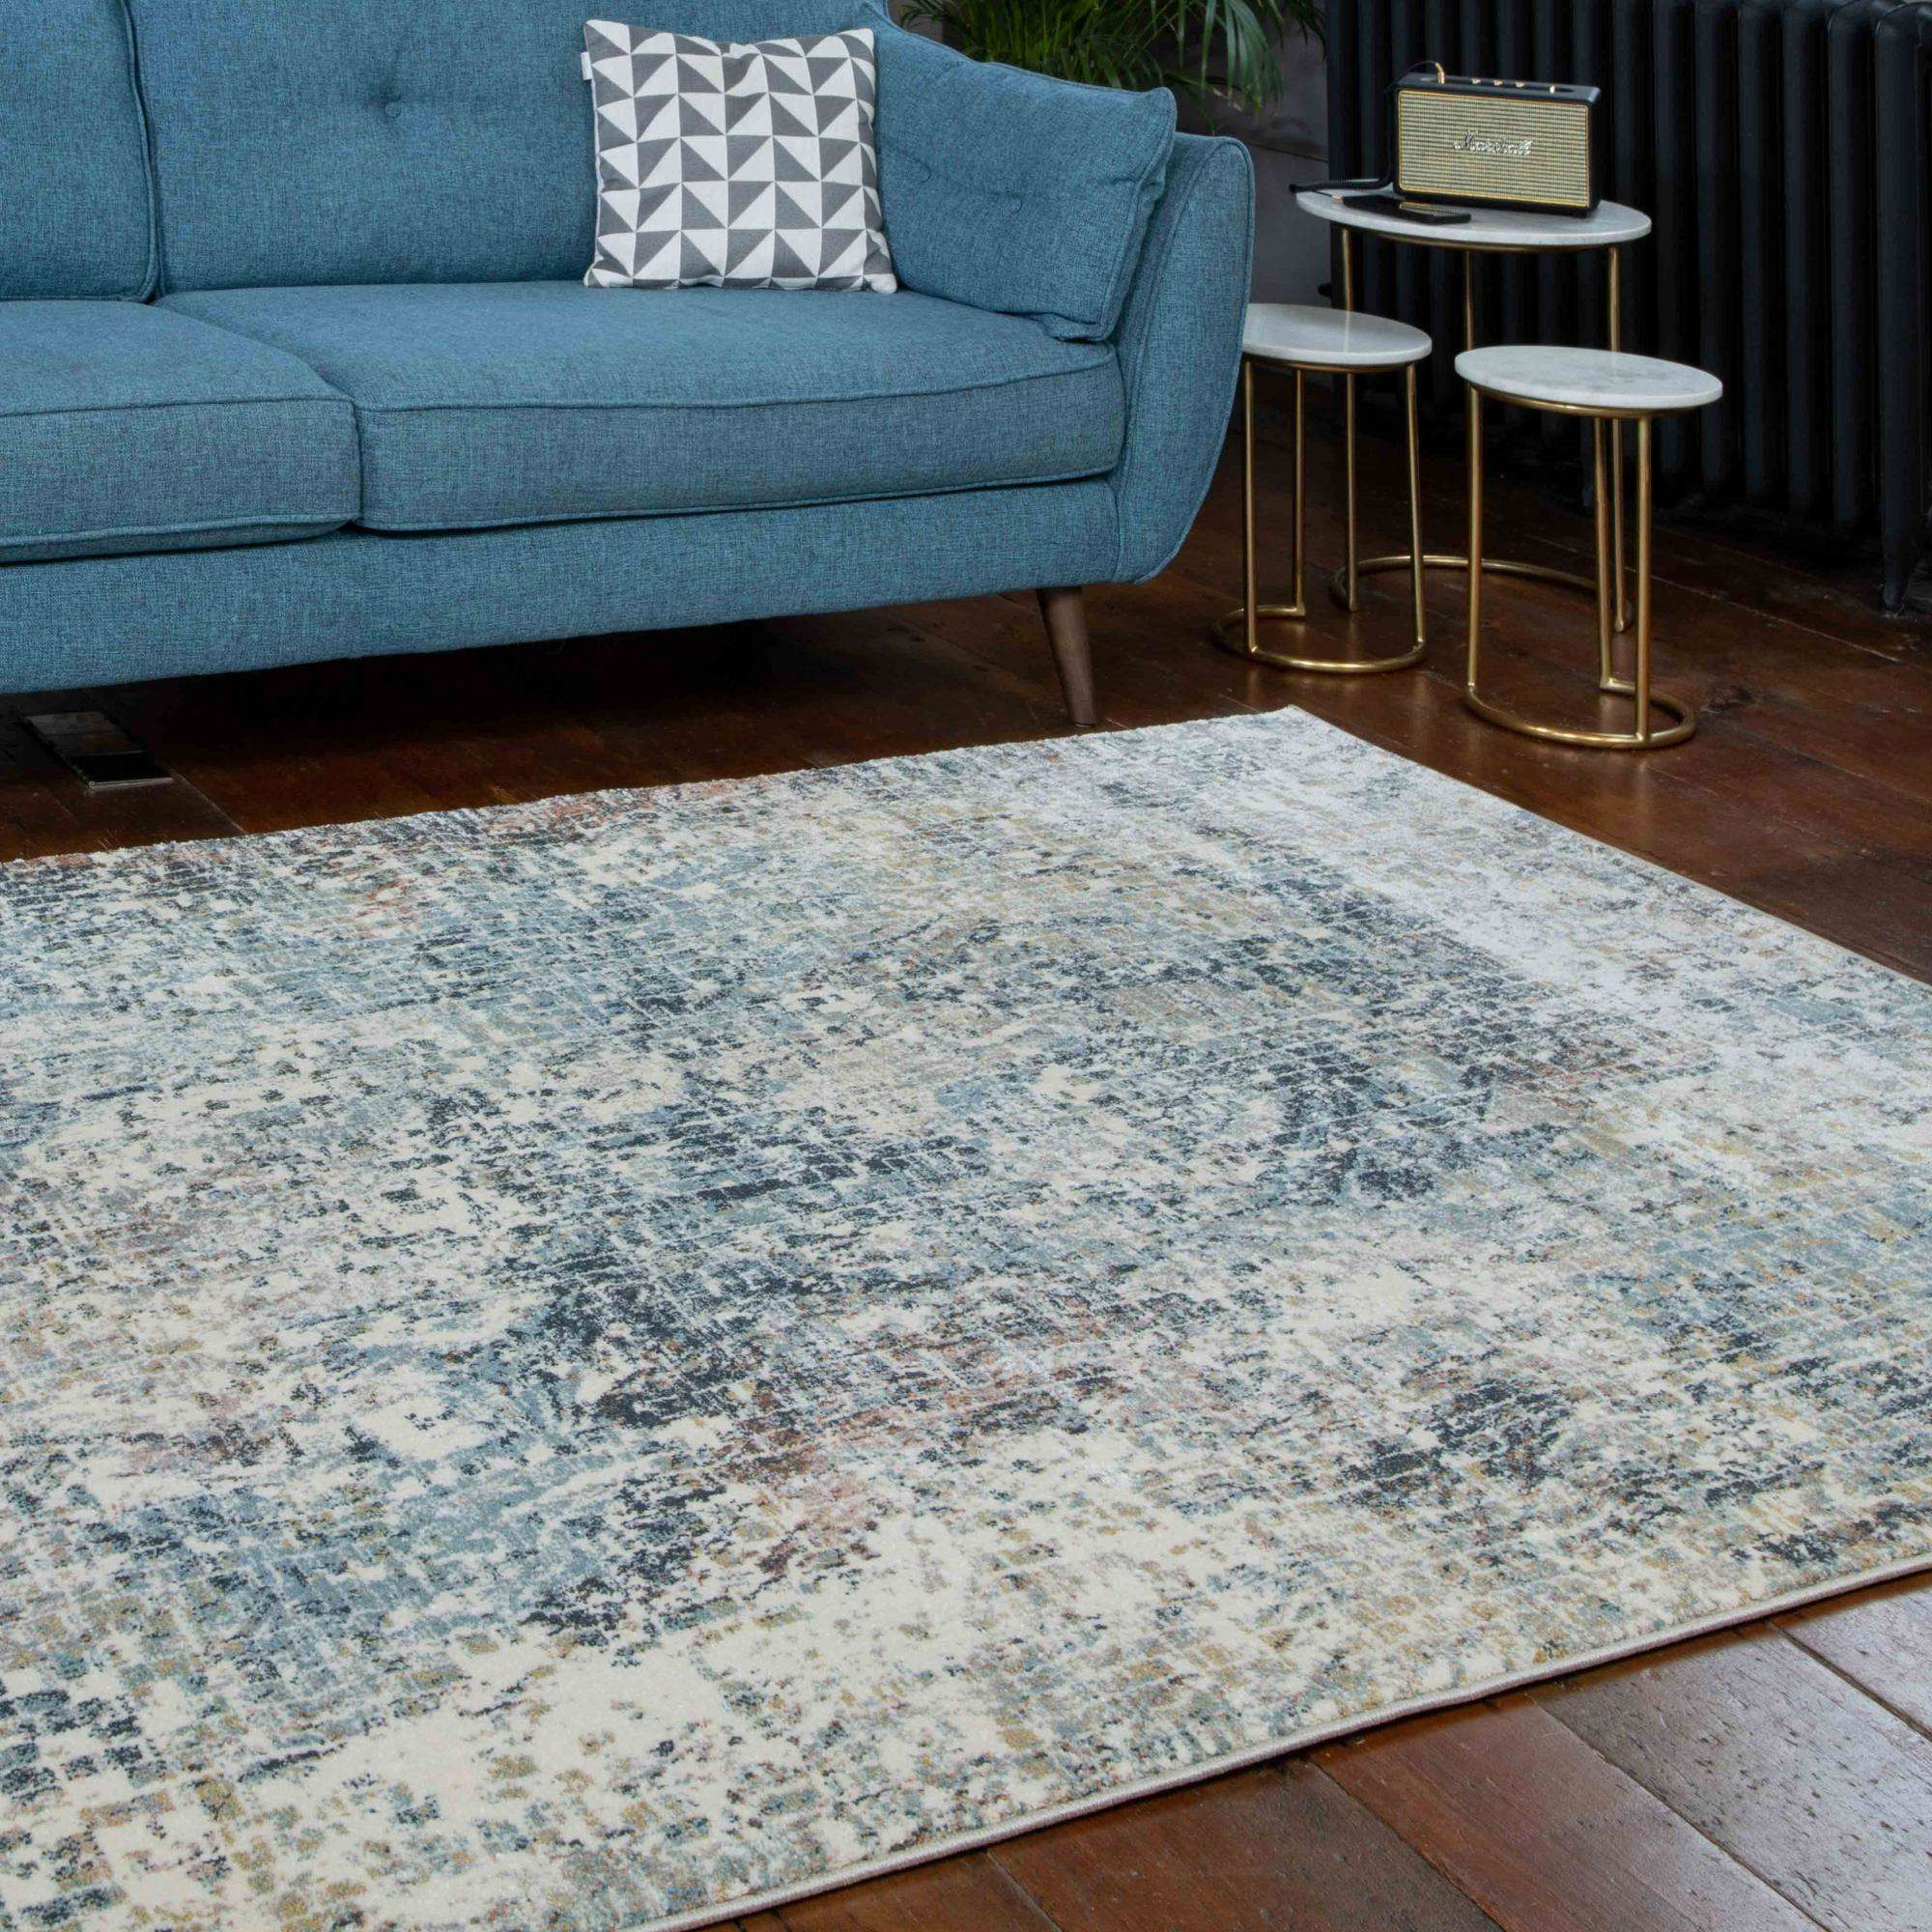 Soft Modern Blue Distressed Abstract Bedroom Rugs - Minuet - Riviera - 60cm x 110cm